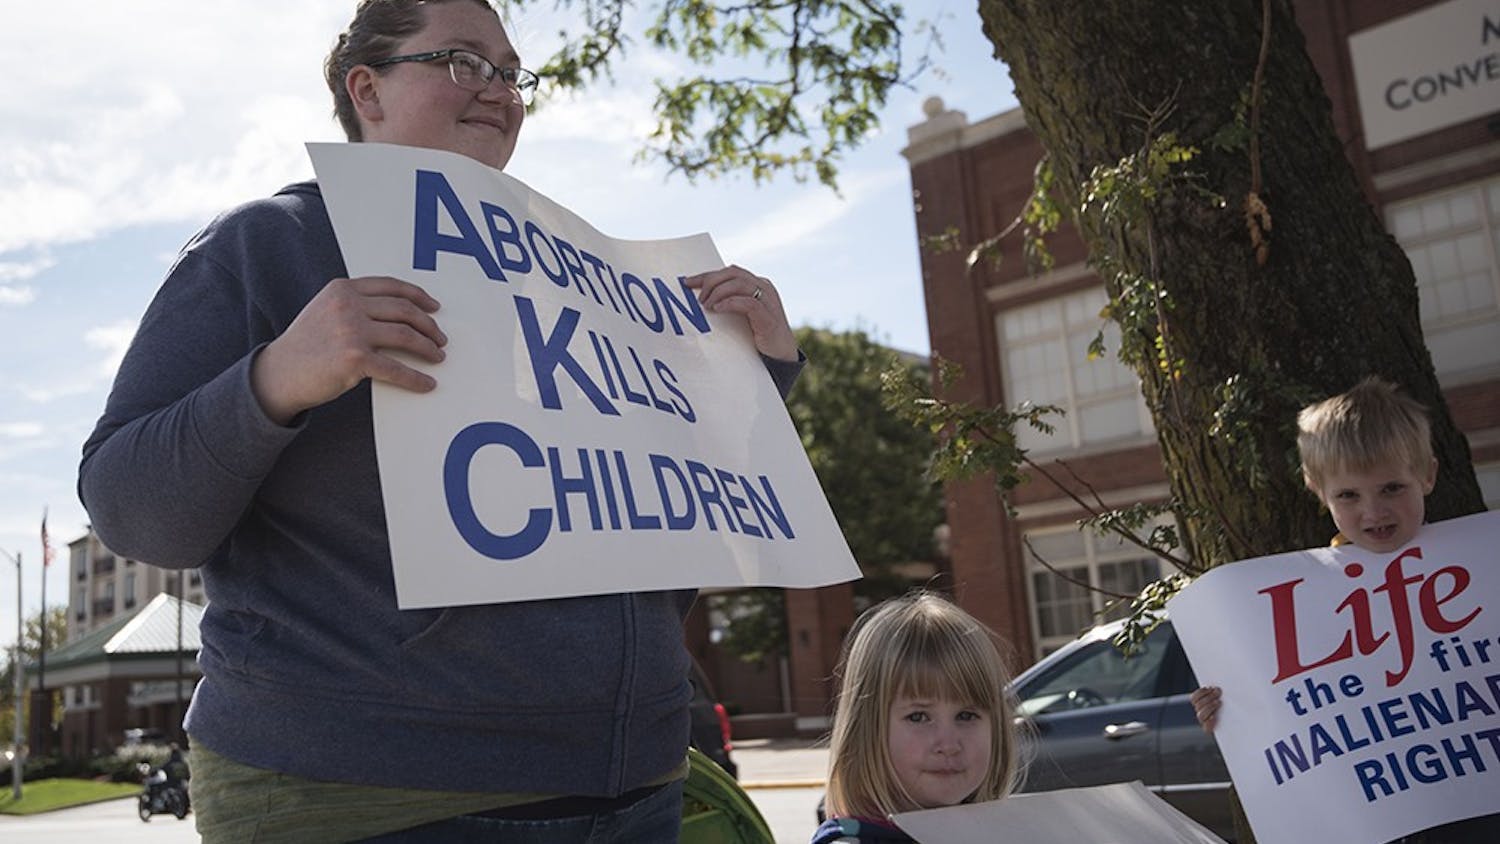 Amber Nikirk and her children Lily and Jeremiah hold pro-life signs on Oct. 1. Pro-life advocates like Nikirk won a major victory in June 2018 when the Supreme Court ruled in their favor in NIFLA v. Becerra&nbsp;